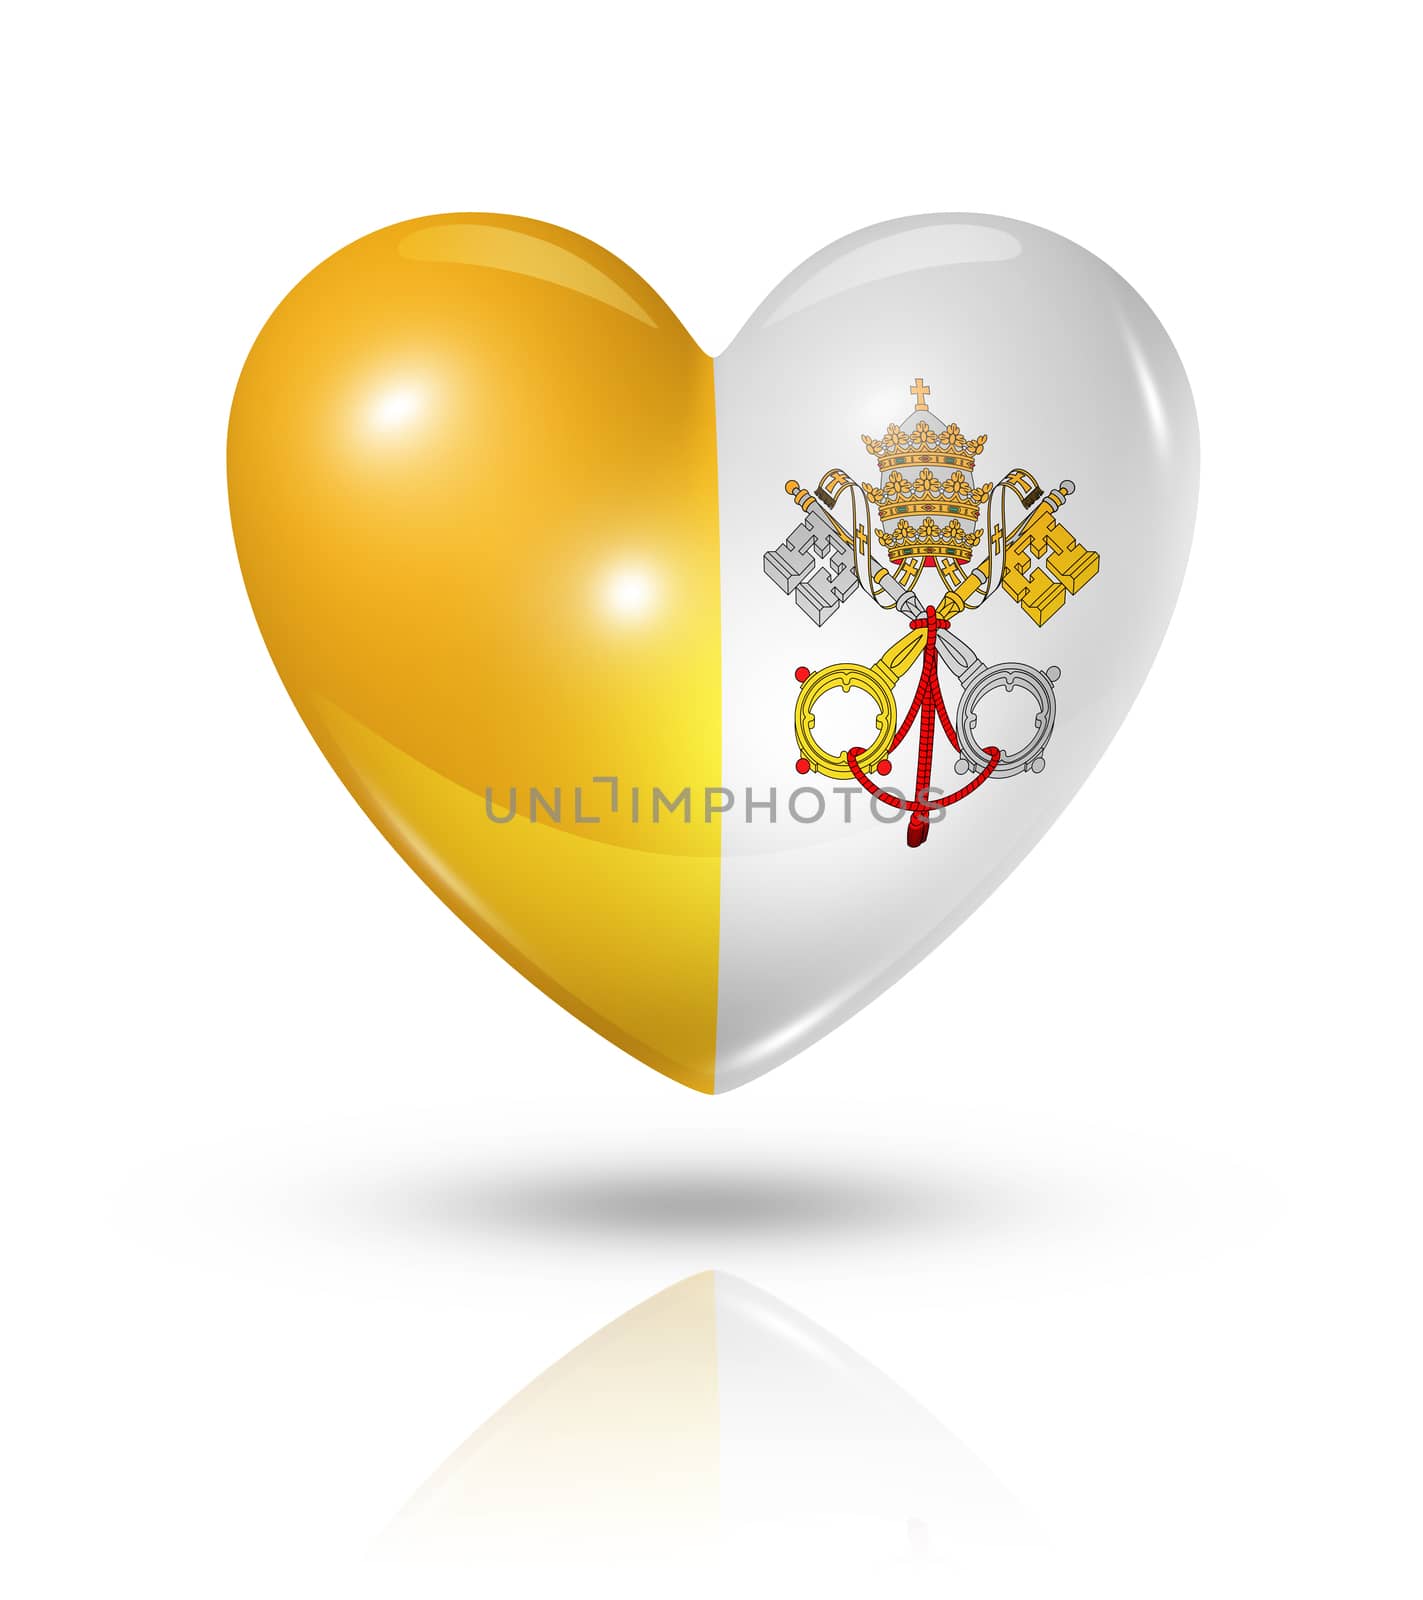 Love Vatican City, heart flag icon by daboost